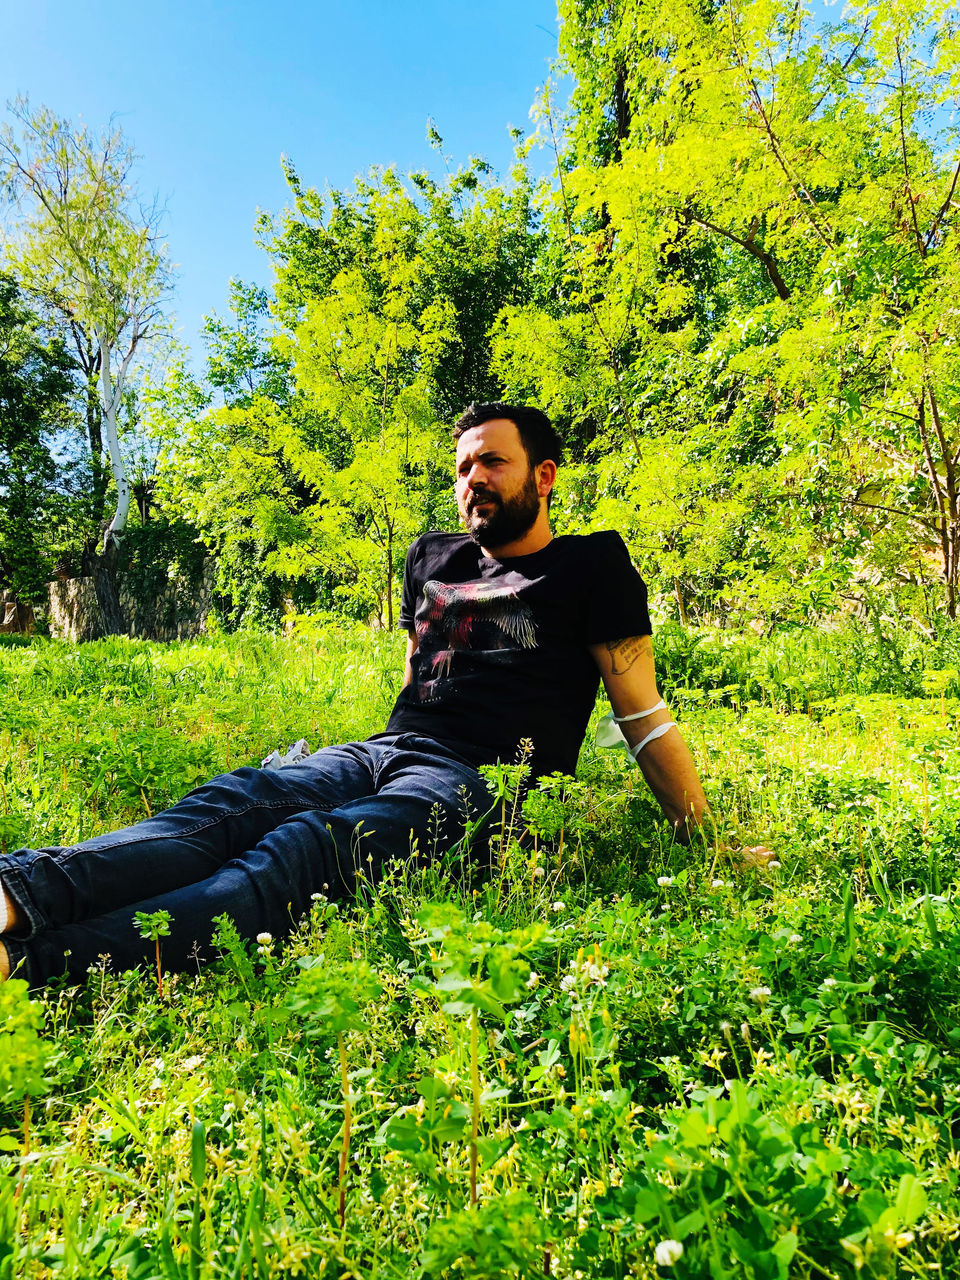 plant, one person, nature, green, tree, leisure activity, lifestyles, casual clothing, young adult, adult, day, grass, growth, full length, meadow, flower, land, sunlight, outdoors, men, field, beauty in nature, front view, relaxation, smiling, sky, happiness, portrait, forest, sitting, sunny, natural environment, looking at camera, lawn